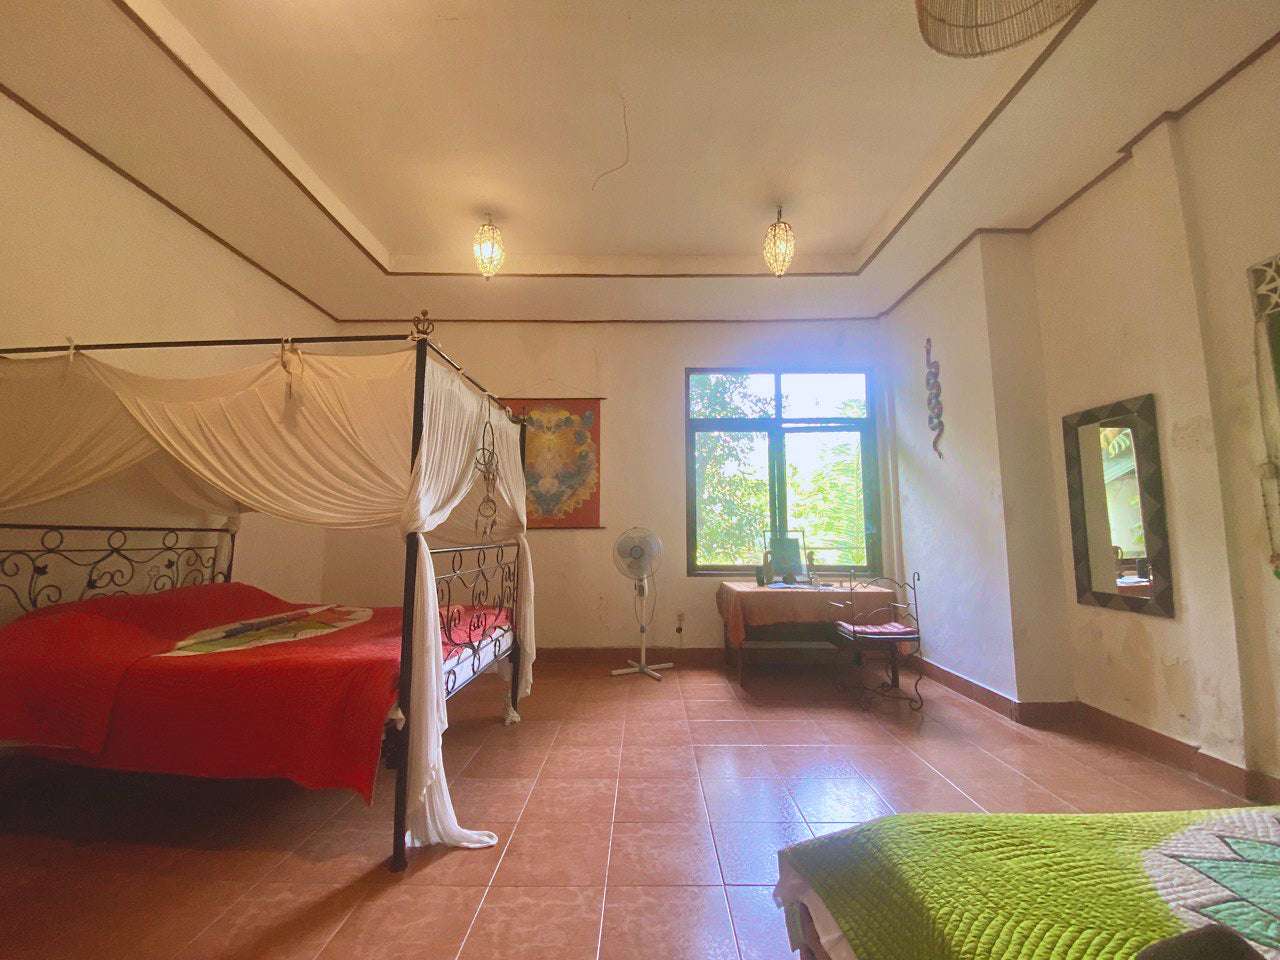 Couples Private bedroom - 2 Person - 1 Month - Bali Flow Temple - Living room with Daily Classes